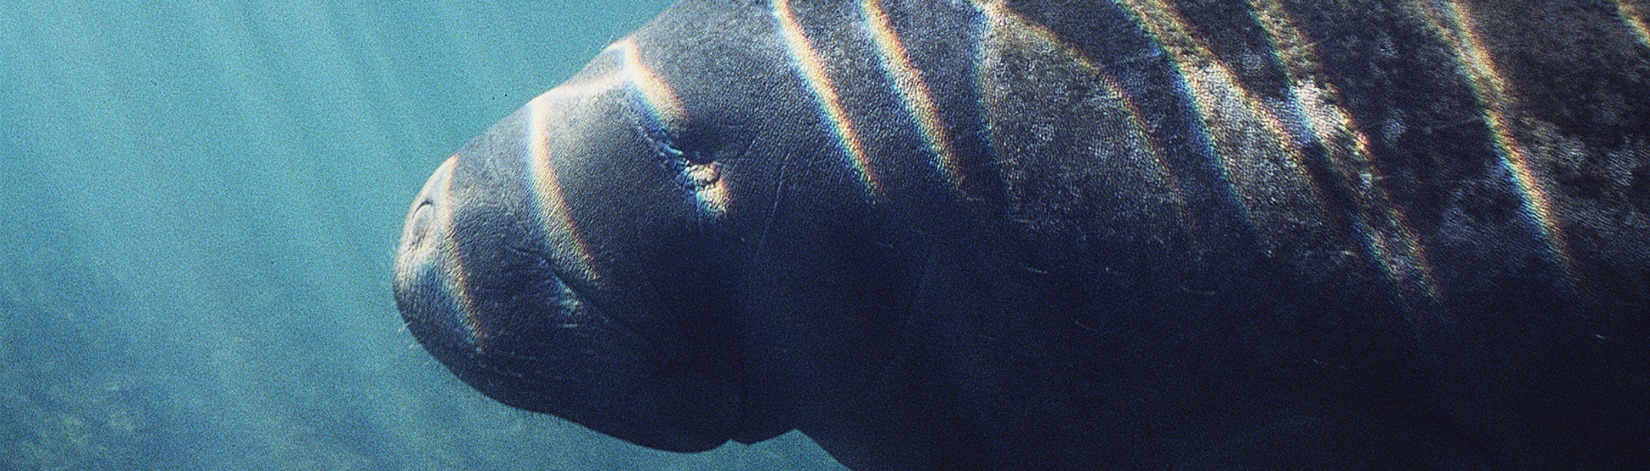 A close-up view of a manatee's head and shoulders as it swims underwater